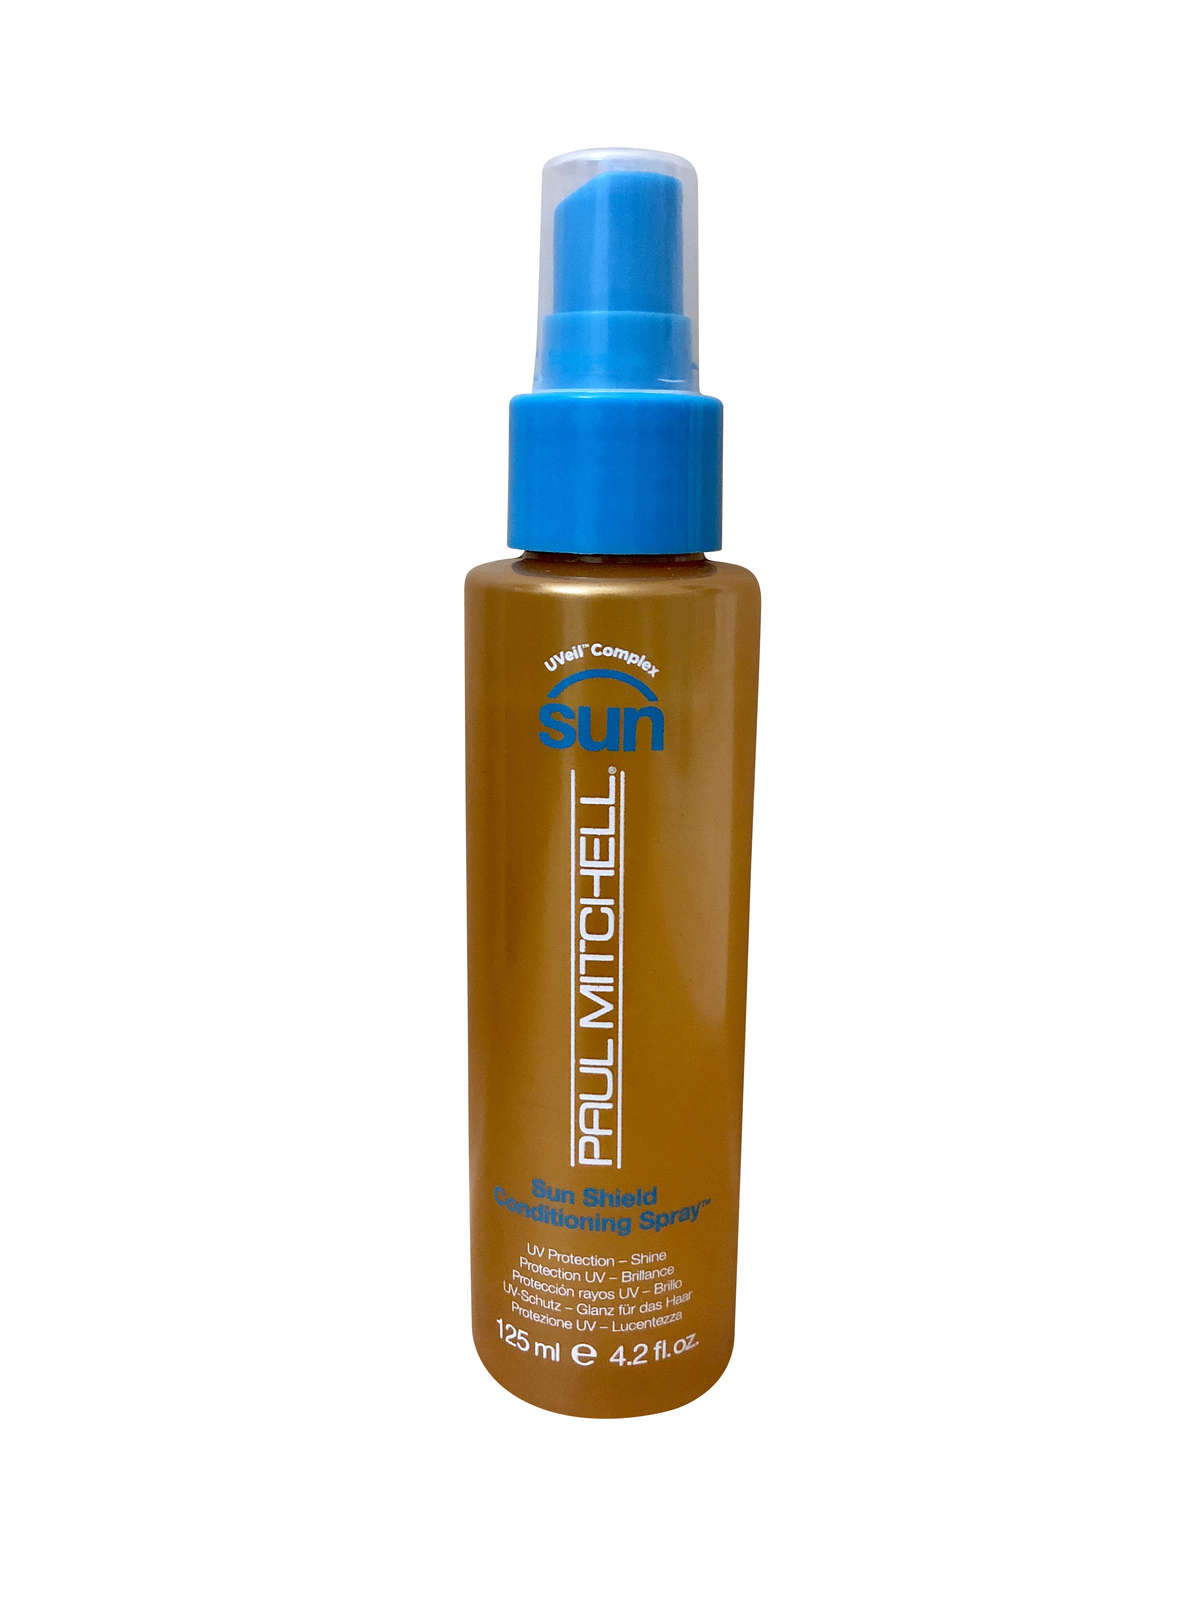 Primary image for Paul Mitchell Sun Shield Conditioning Spray 4.2 oz.